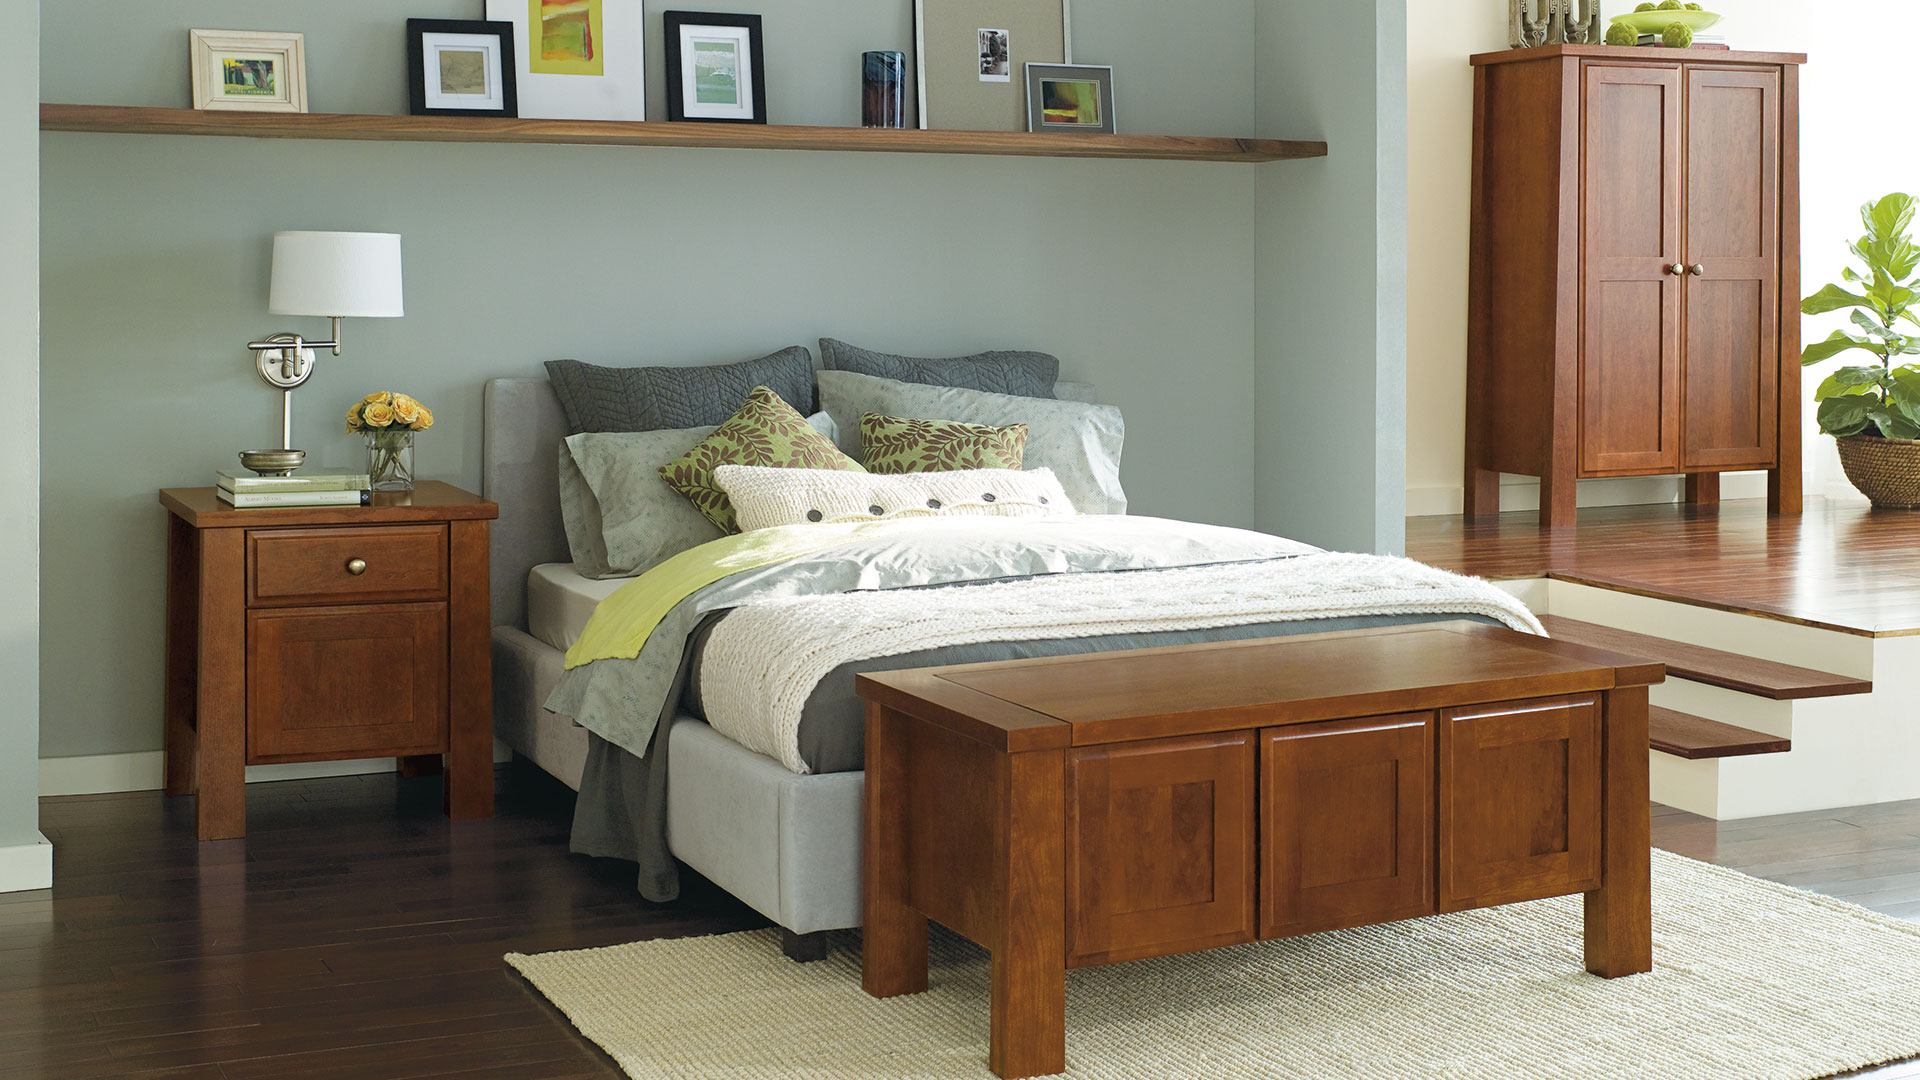 typical bedroom furniture pieces